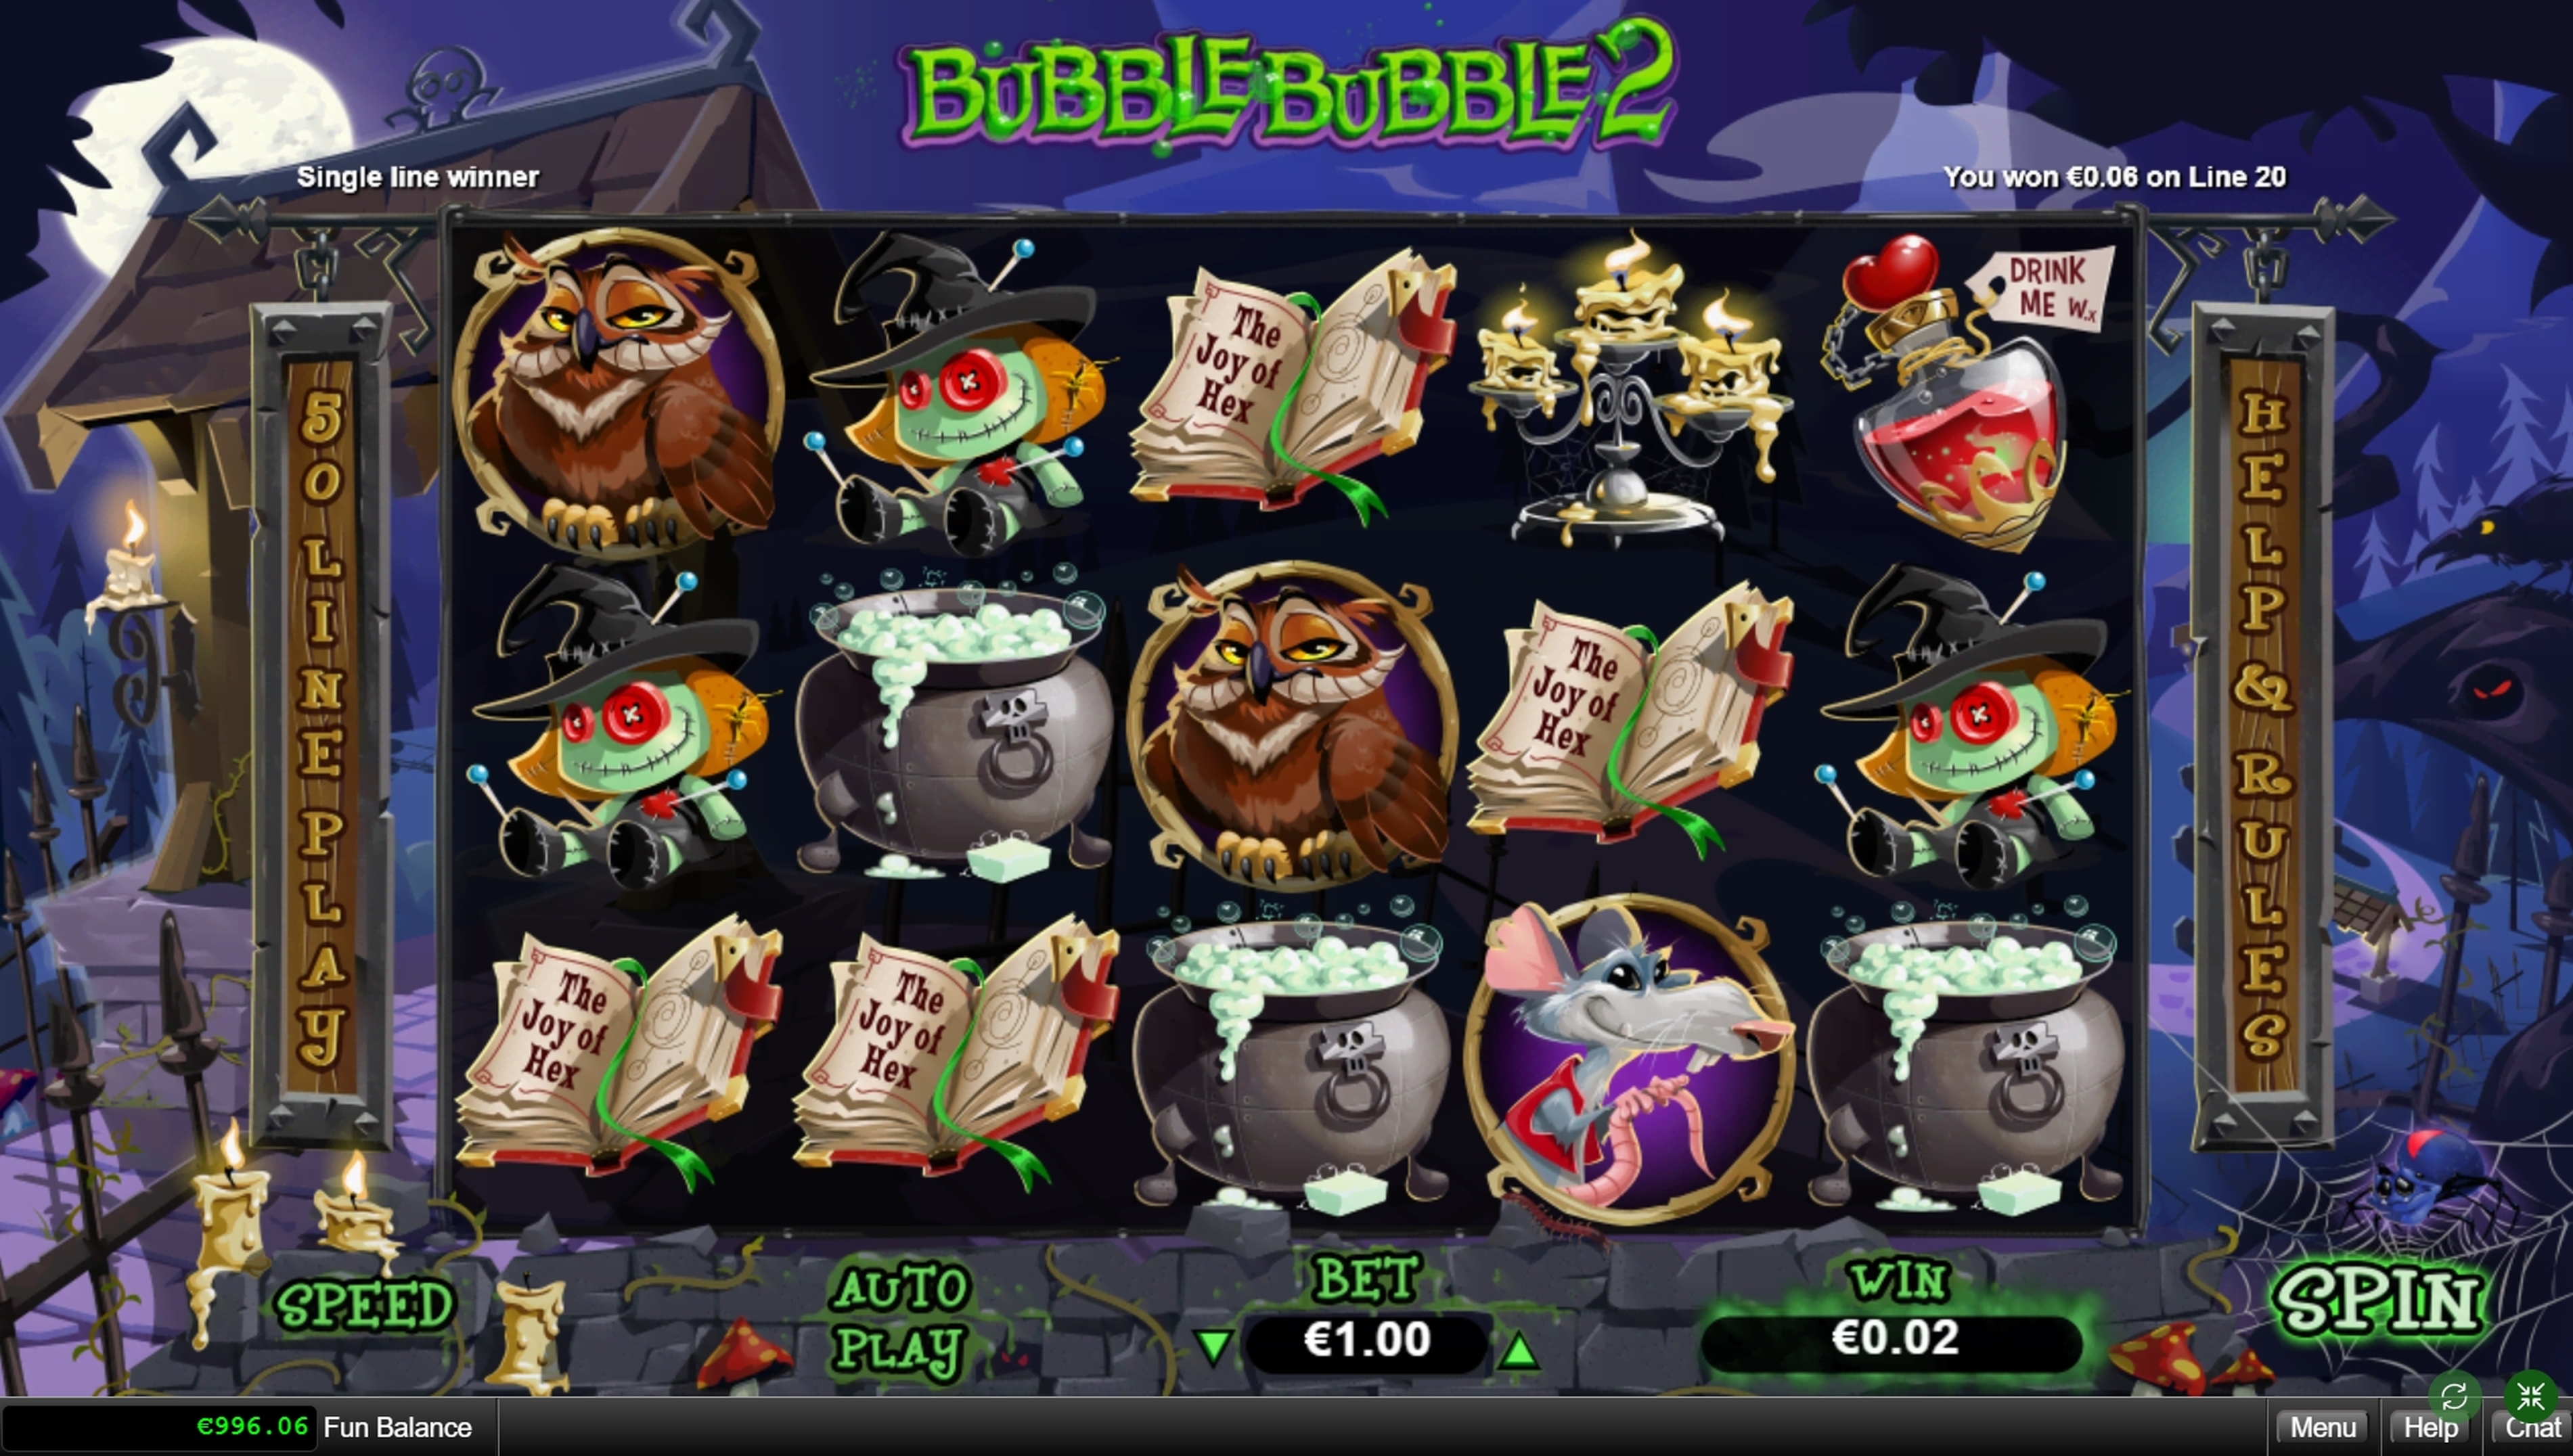 Win Money in Bubble Bubble 2 Free Slot Game by Real Time Gaming